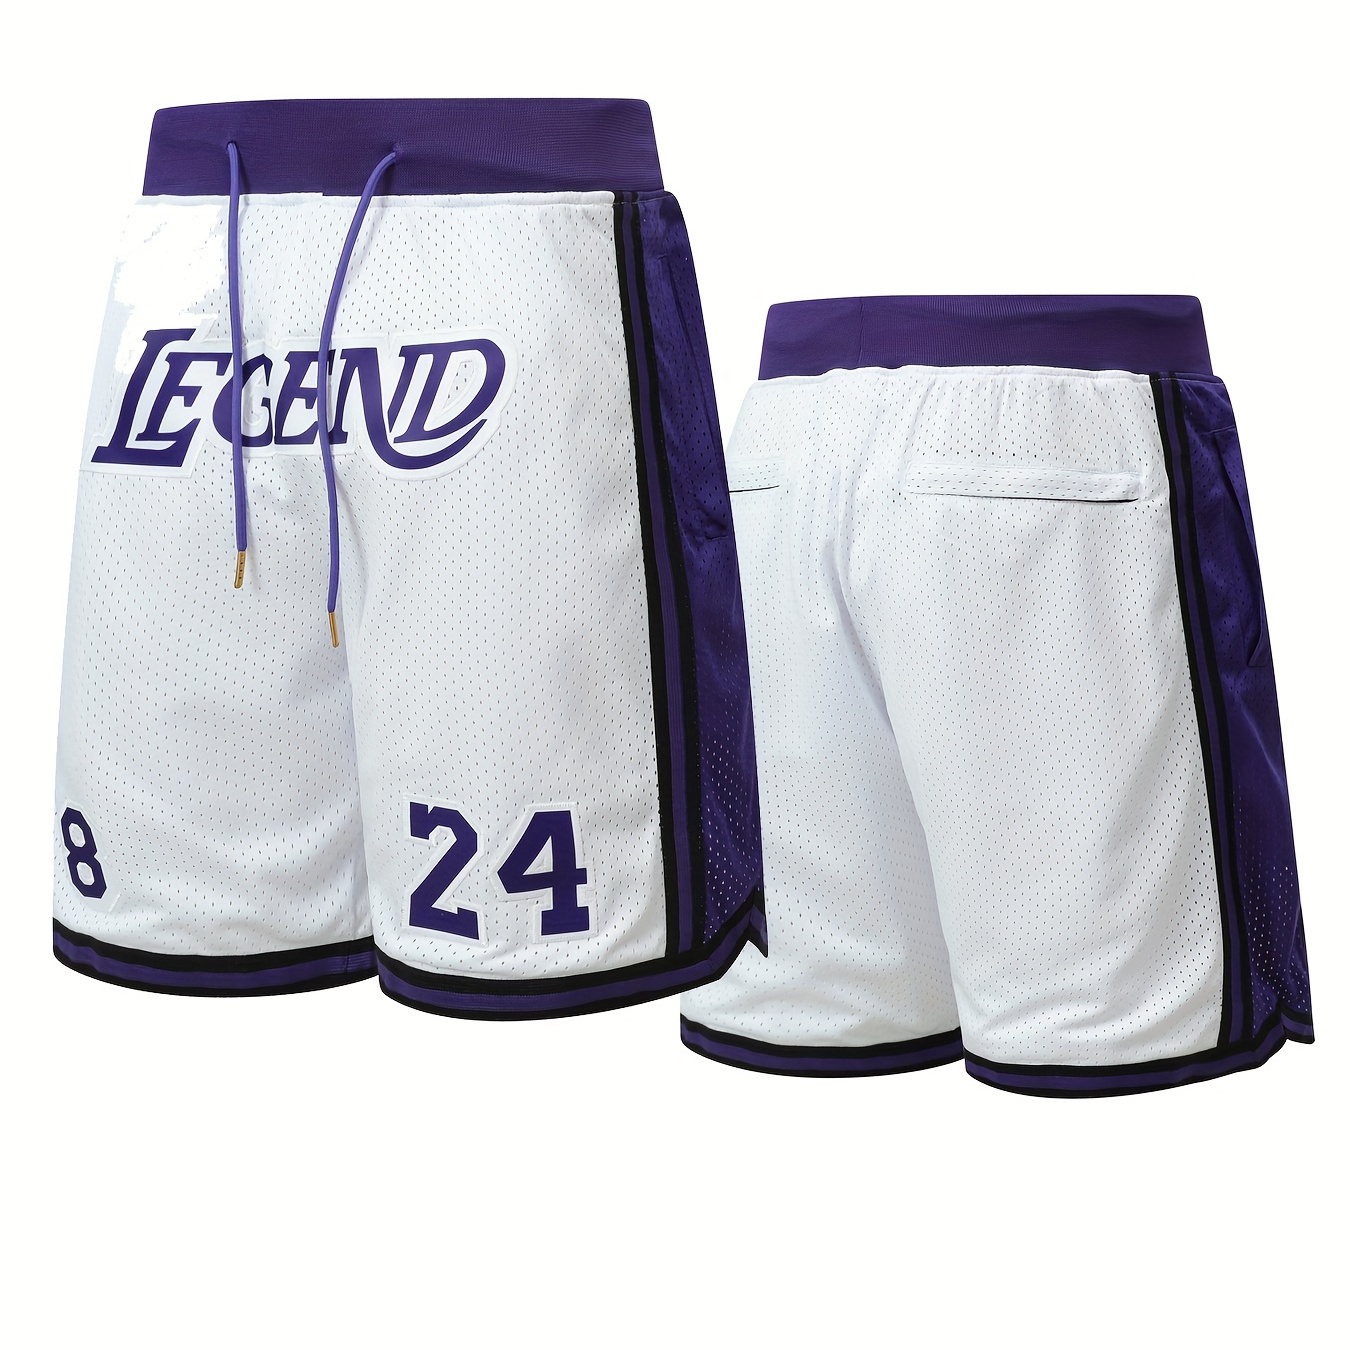 

Men's Embroidered Basketball Shorts, Active Slightly Stretch Breathable Mesh Drawstring Shorts For Workout Outdoor, Men's Clothing For Summer Size S-xxxl